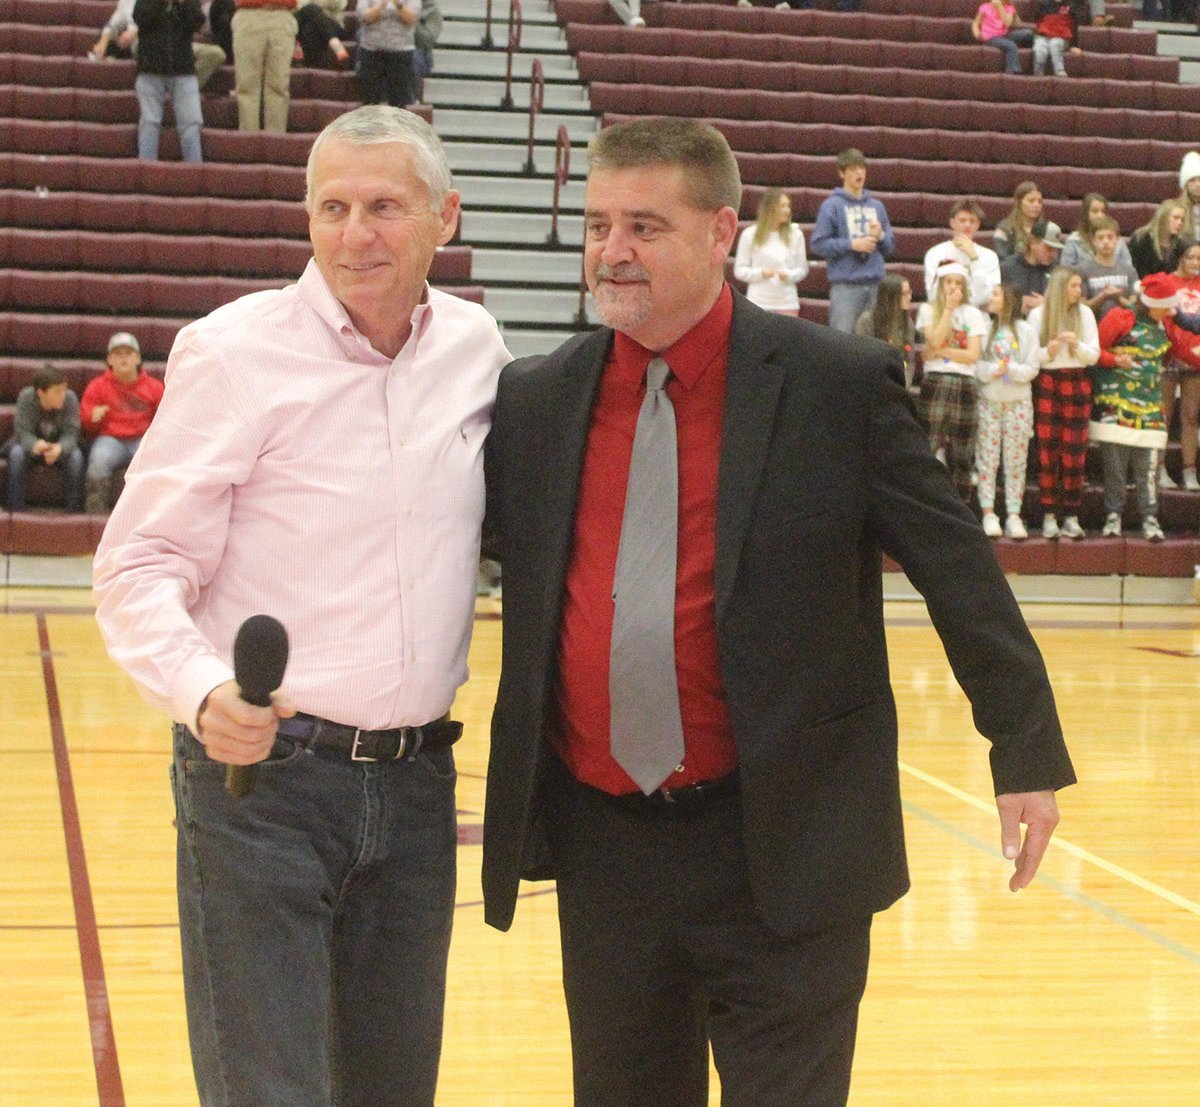 Two Hall of Fame coaches. Brent Colley, left, shared some special remarks before Mountain Grove head coach Duane Hiler was presented a plaque recognizing him for his recent induction into the Missouri Basketball Coaches Hall of Fame.